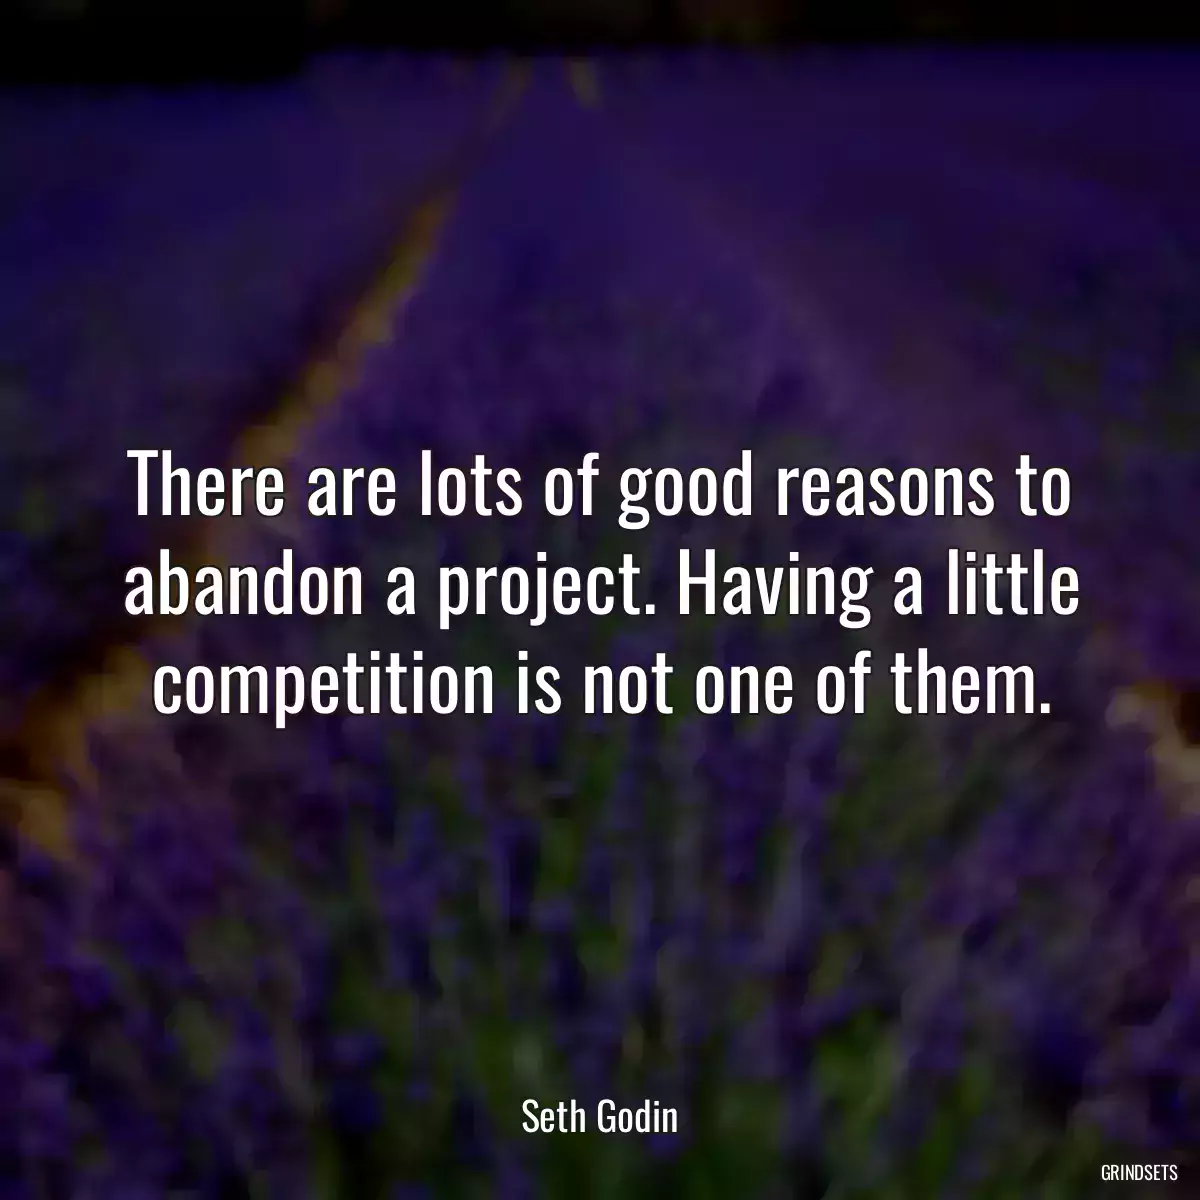 There are lots of good reasons to abandon a project. Having a little competition is not one of them.